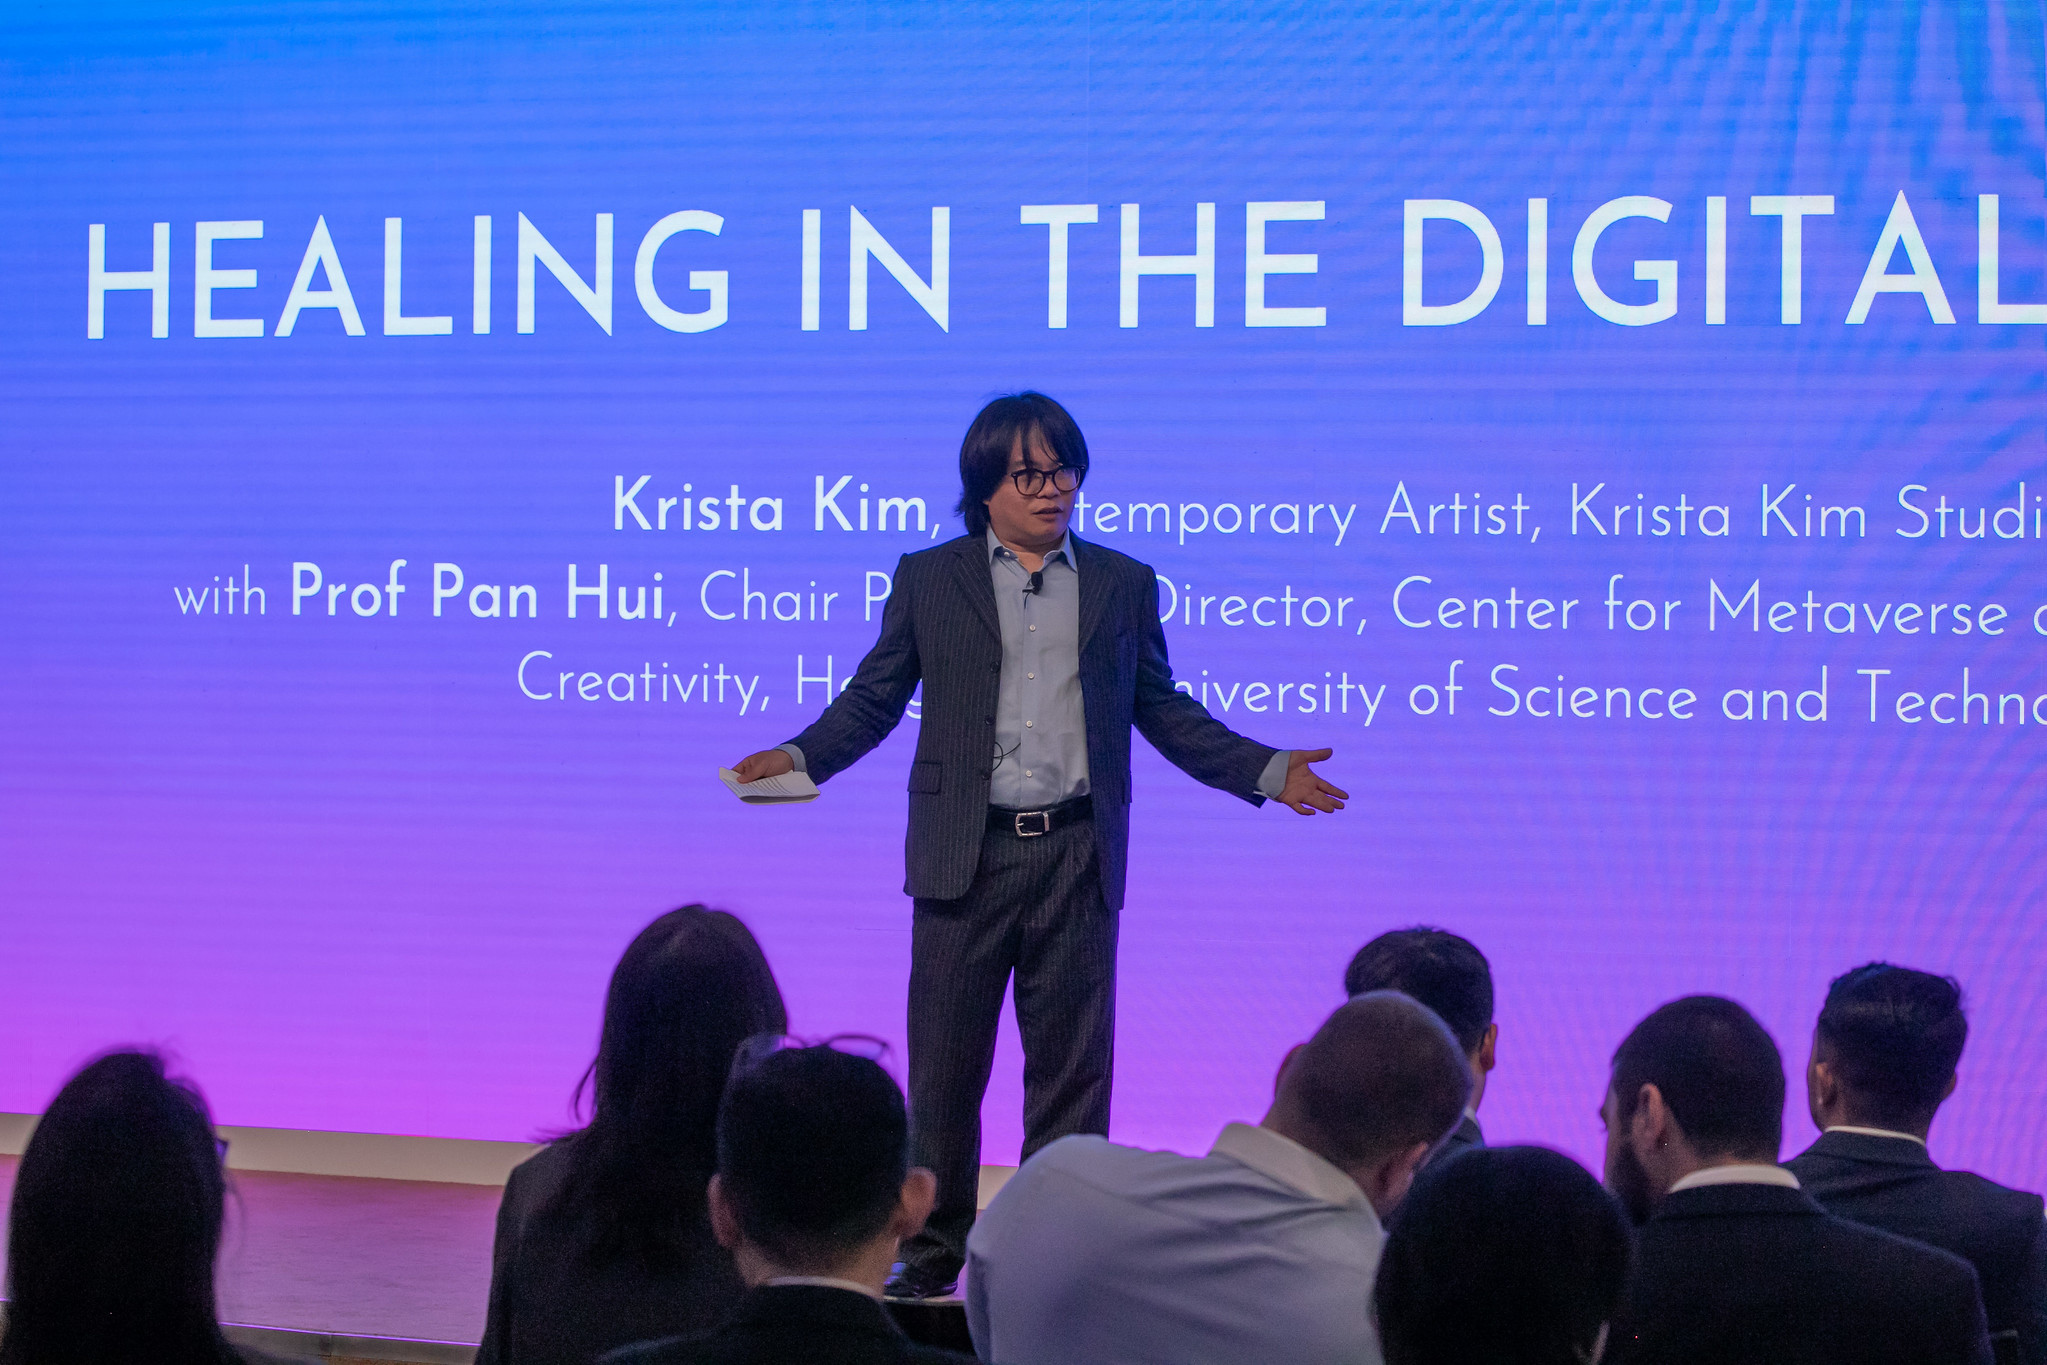 Prof. Pan HUI, Chair Professor of Computational Media and Arts and Director of the Center for Metaverse and Computational Creativity, HKUST (GZ), and Chair Professor of Emerging Interdisciplinary Areas, HKUST